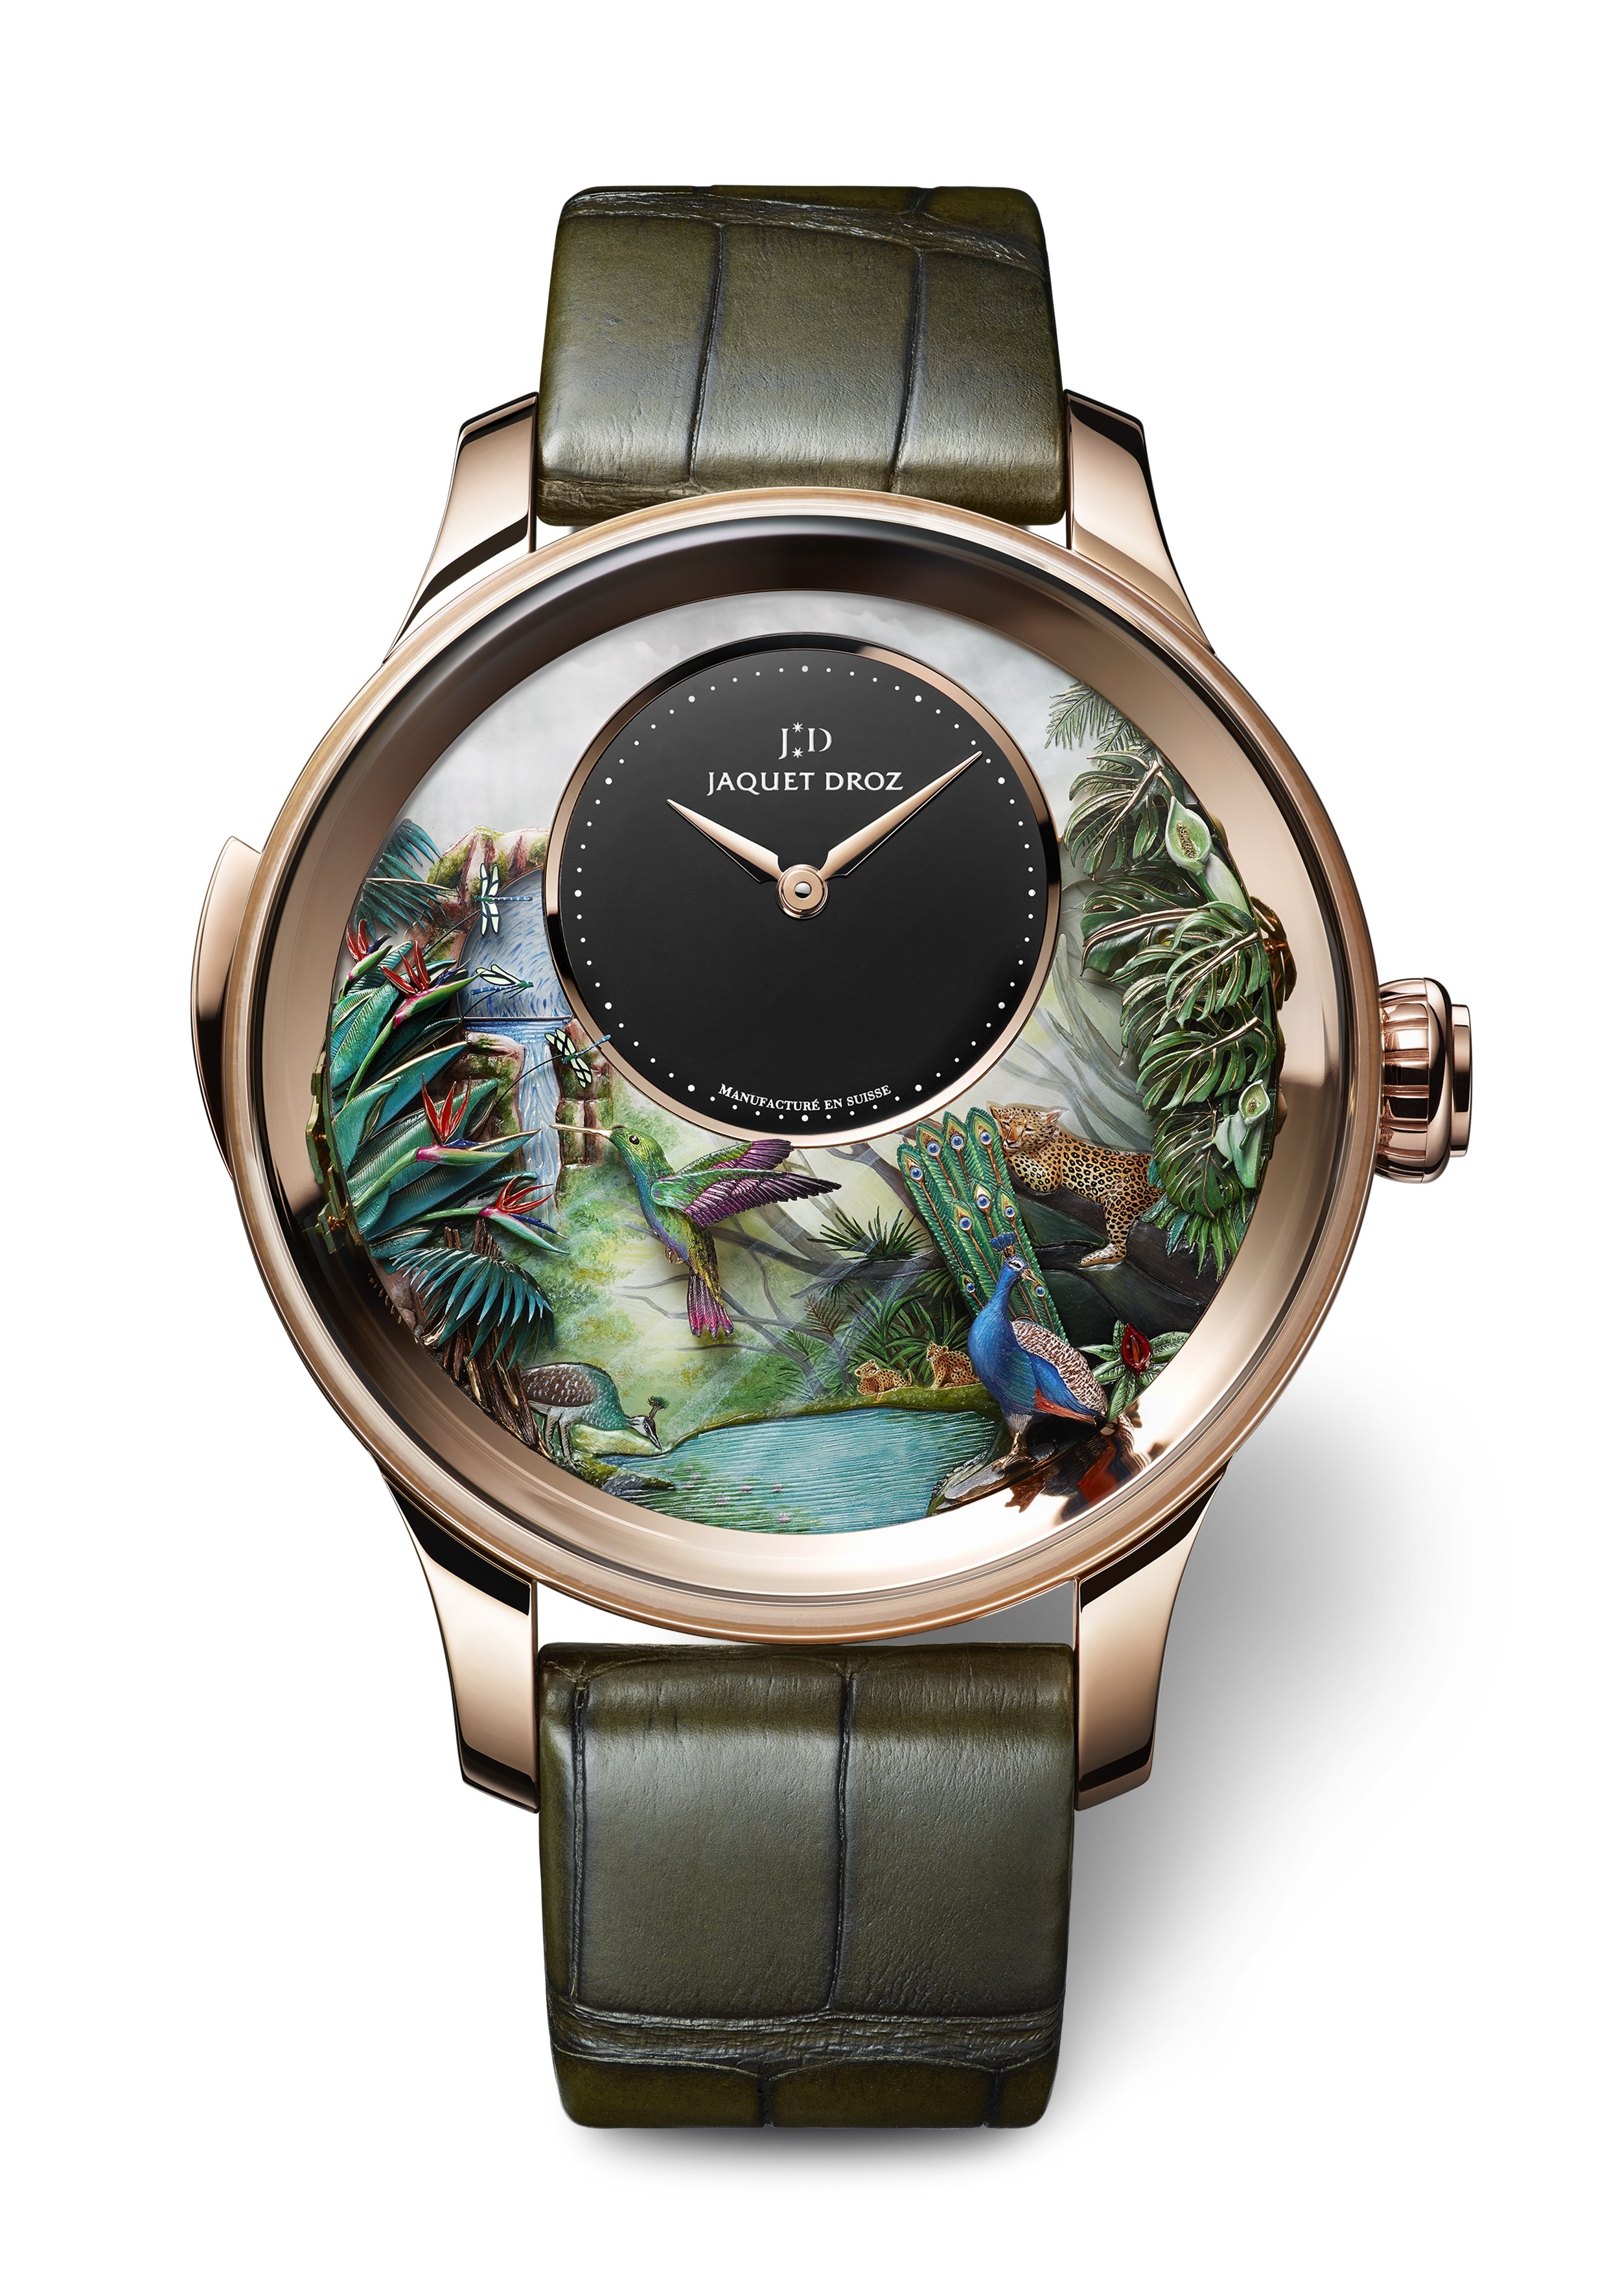 Jaquet Droz. The artistic timepiece, with a black onyx sub-dial, features hand-engraved and hand-painted decorations, including a peacock, tropical leaves, a humming bird, a toucan, dragonflies and a waterfall, on its white mother-of-pearl dial, HK$5.37 million